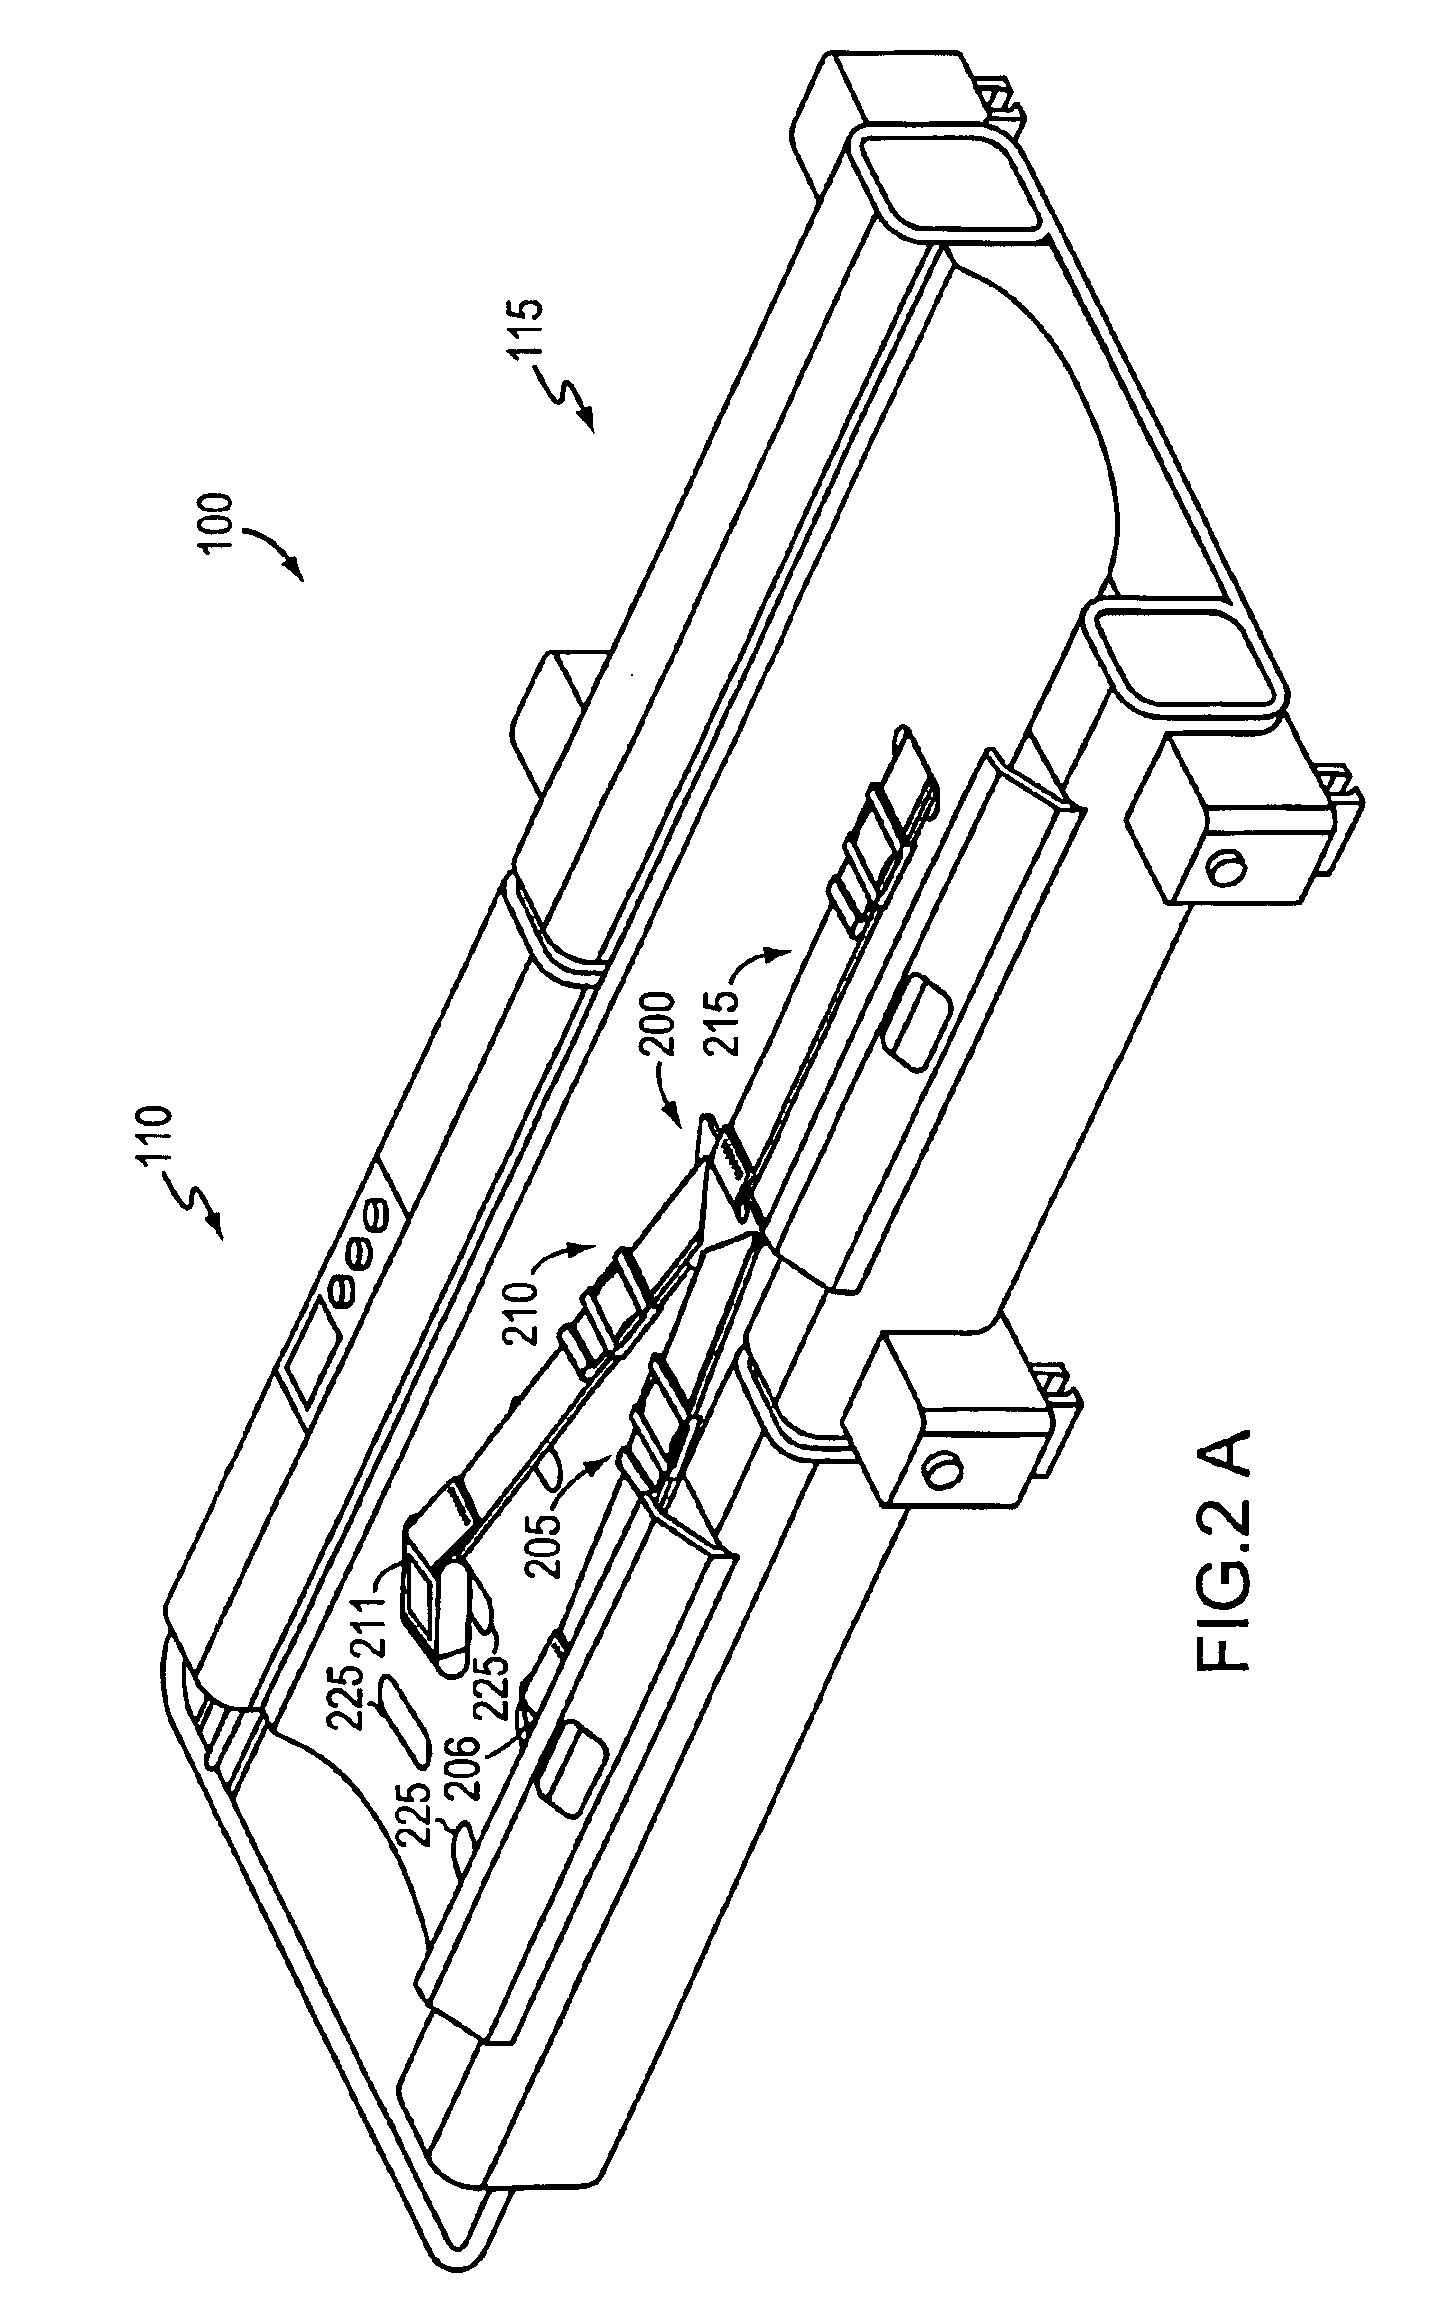 Device for emergency transport of pediatric patients